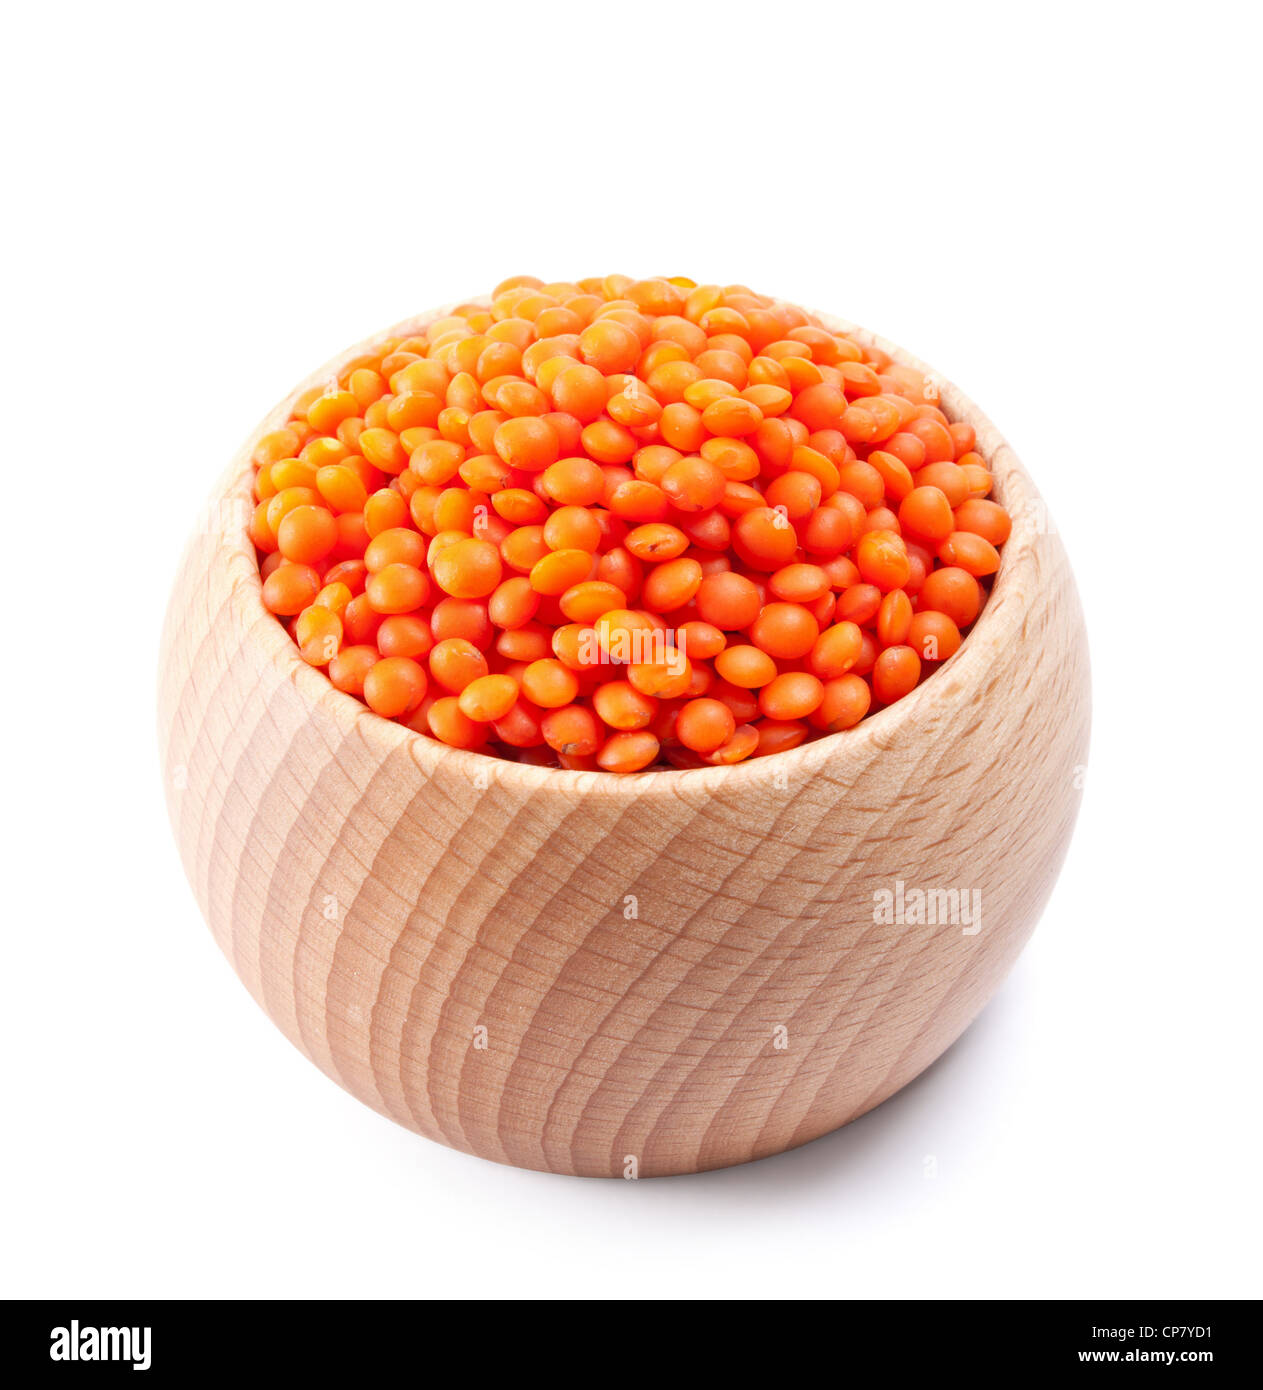 wooden bowl full of red lentils isolated on white background Stock Photo